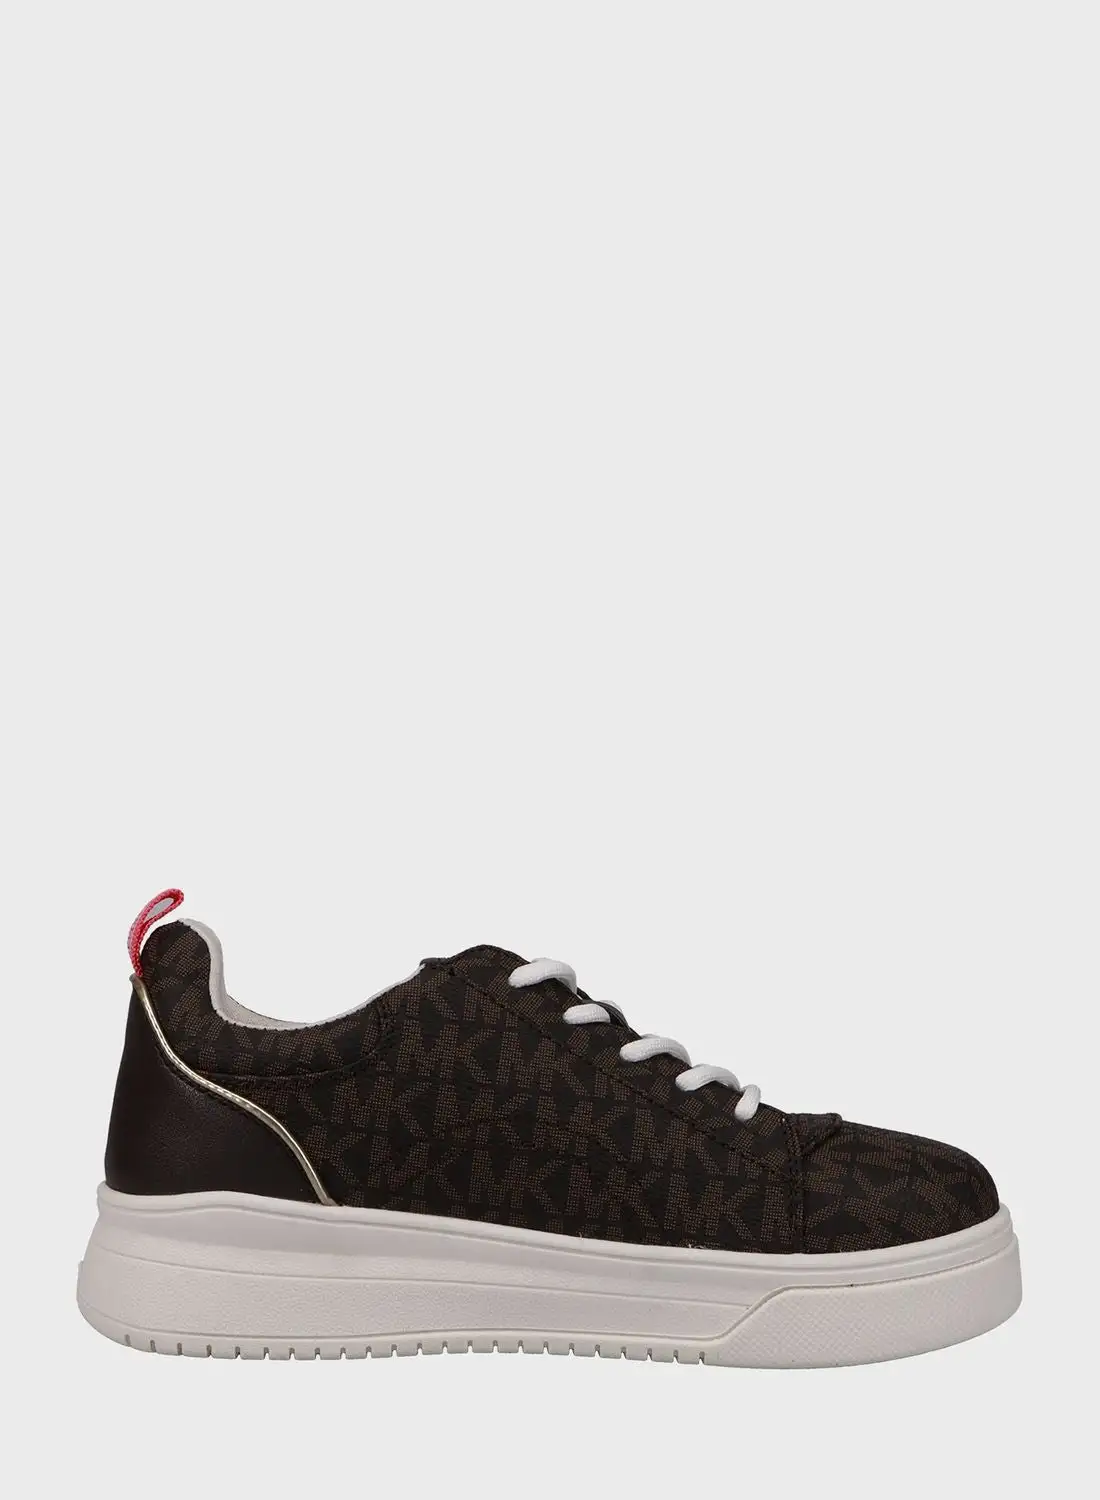 Michael Kors Youth Alex Jogger Sneakers